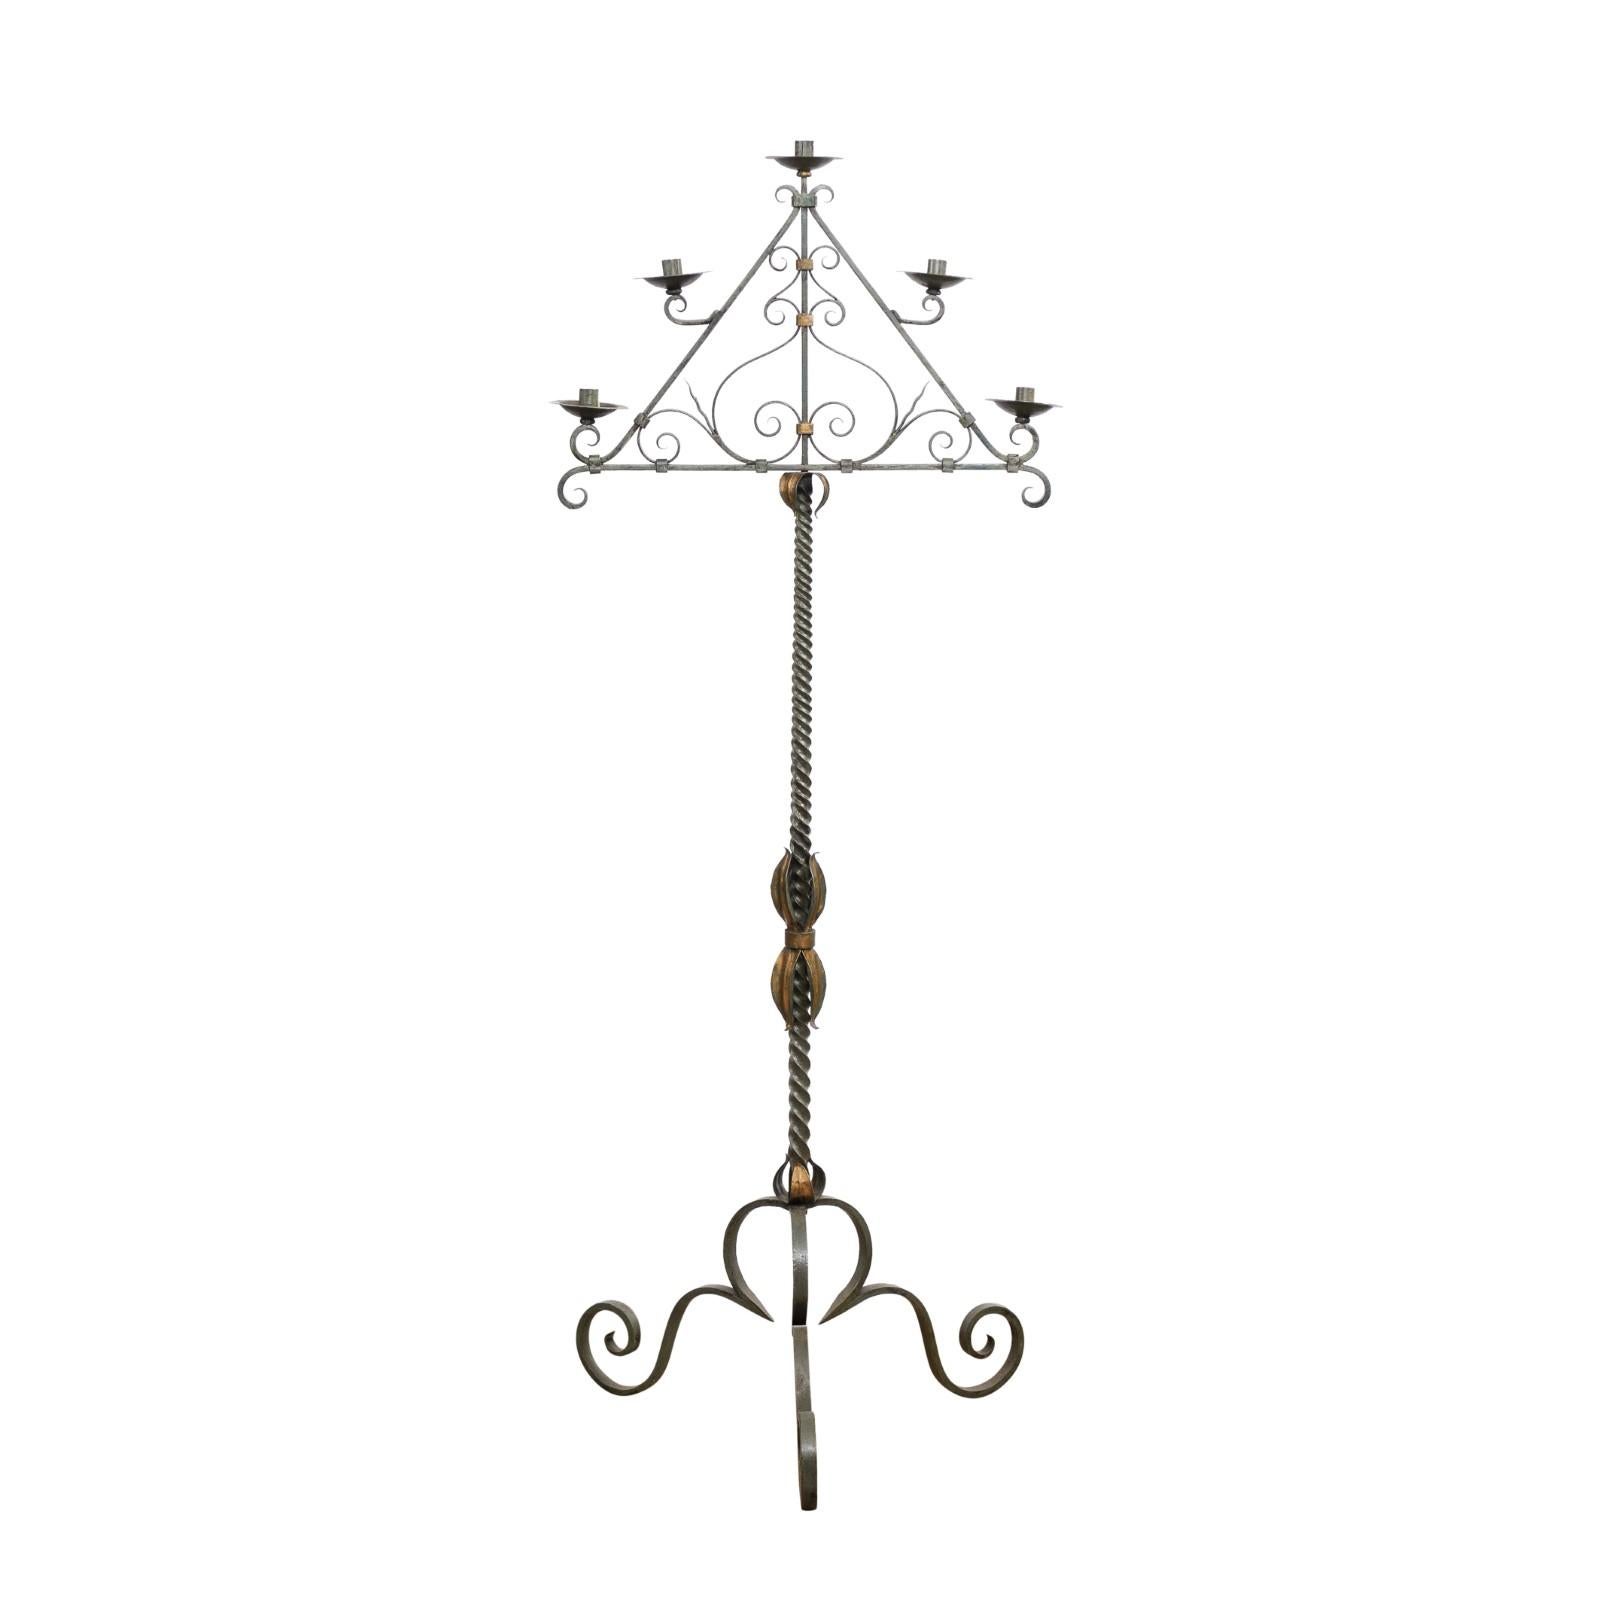 A large French wrought iron free standing candelabra from the 20th century with five arms, celadon lacquer, gilded accentuation and tripod base. Created in France during the 20th century, this large free standing candelabra features a triangular